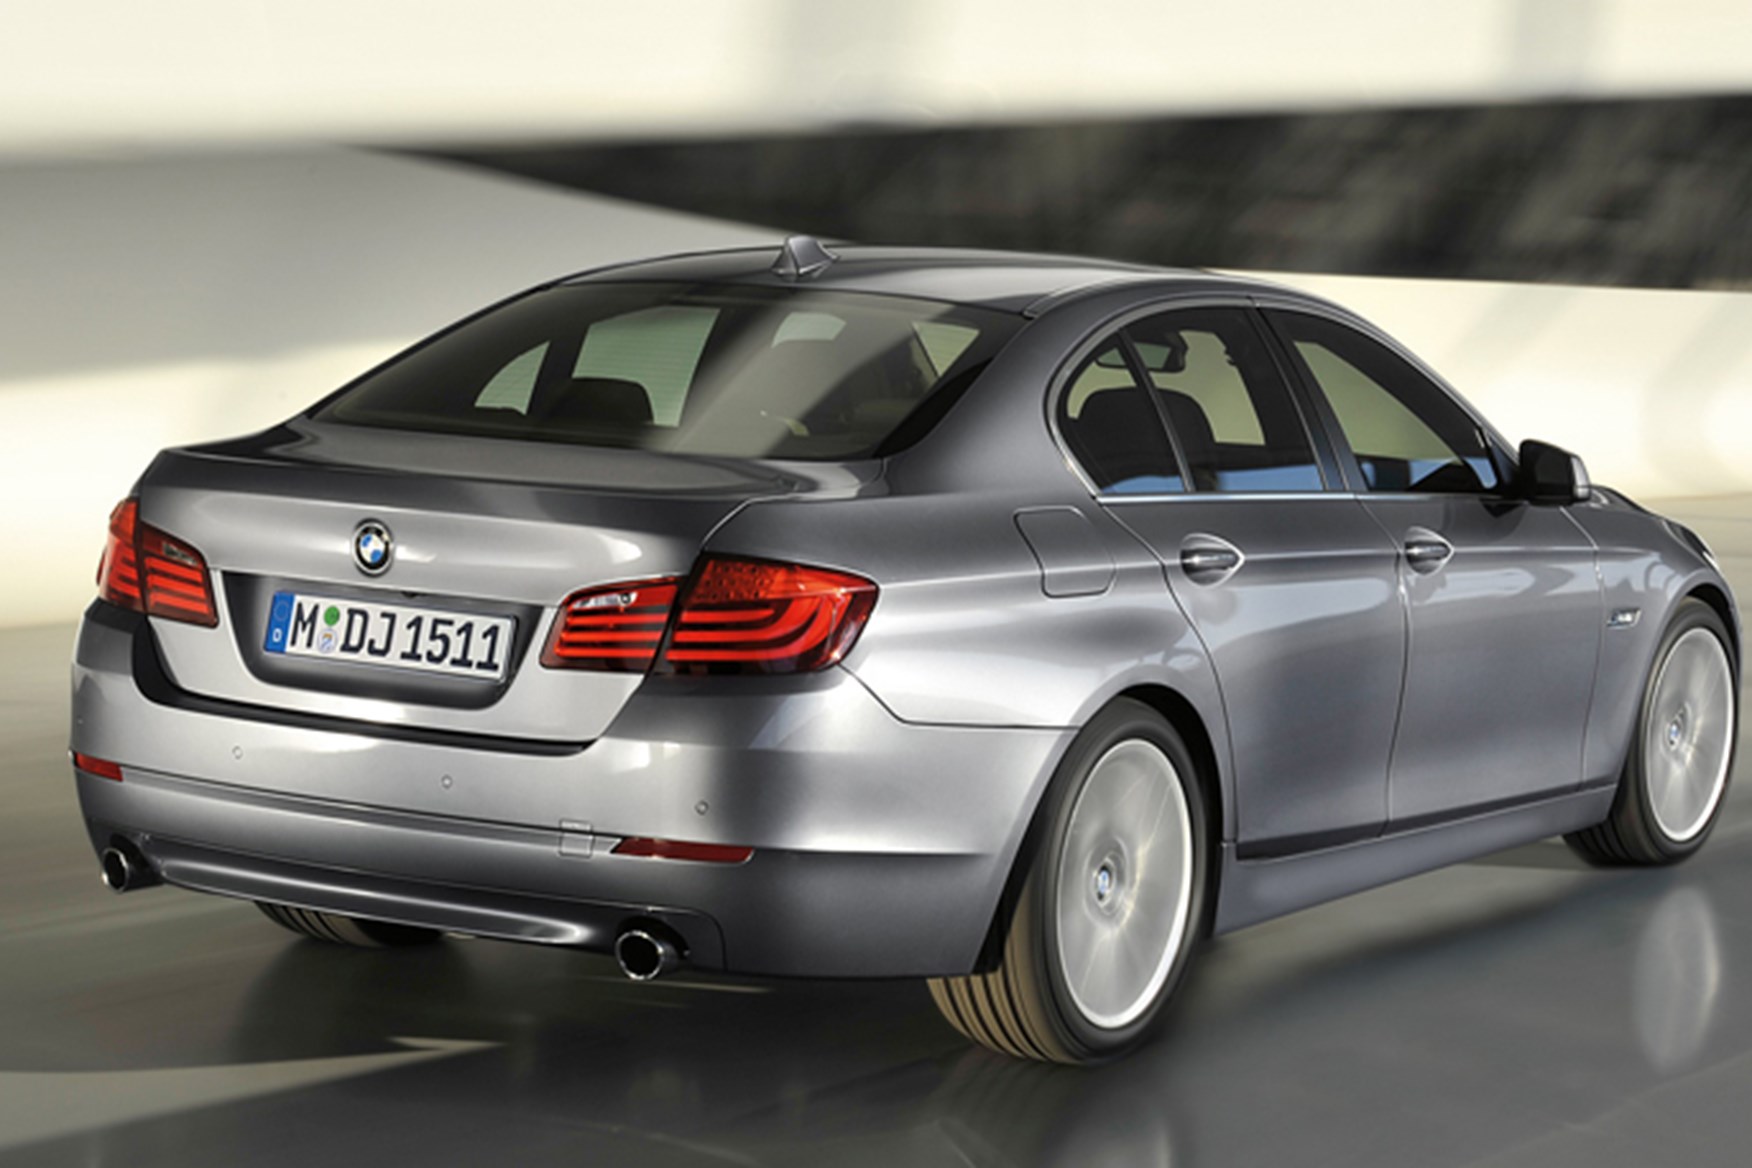 BMW 5-series (2010) photos and video of new F10 | CAR Magazine